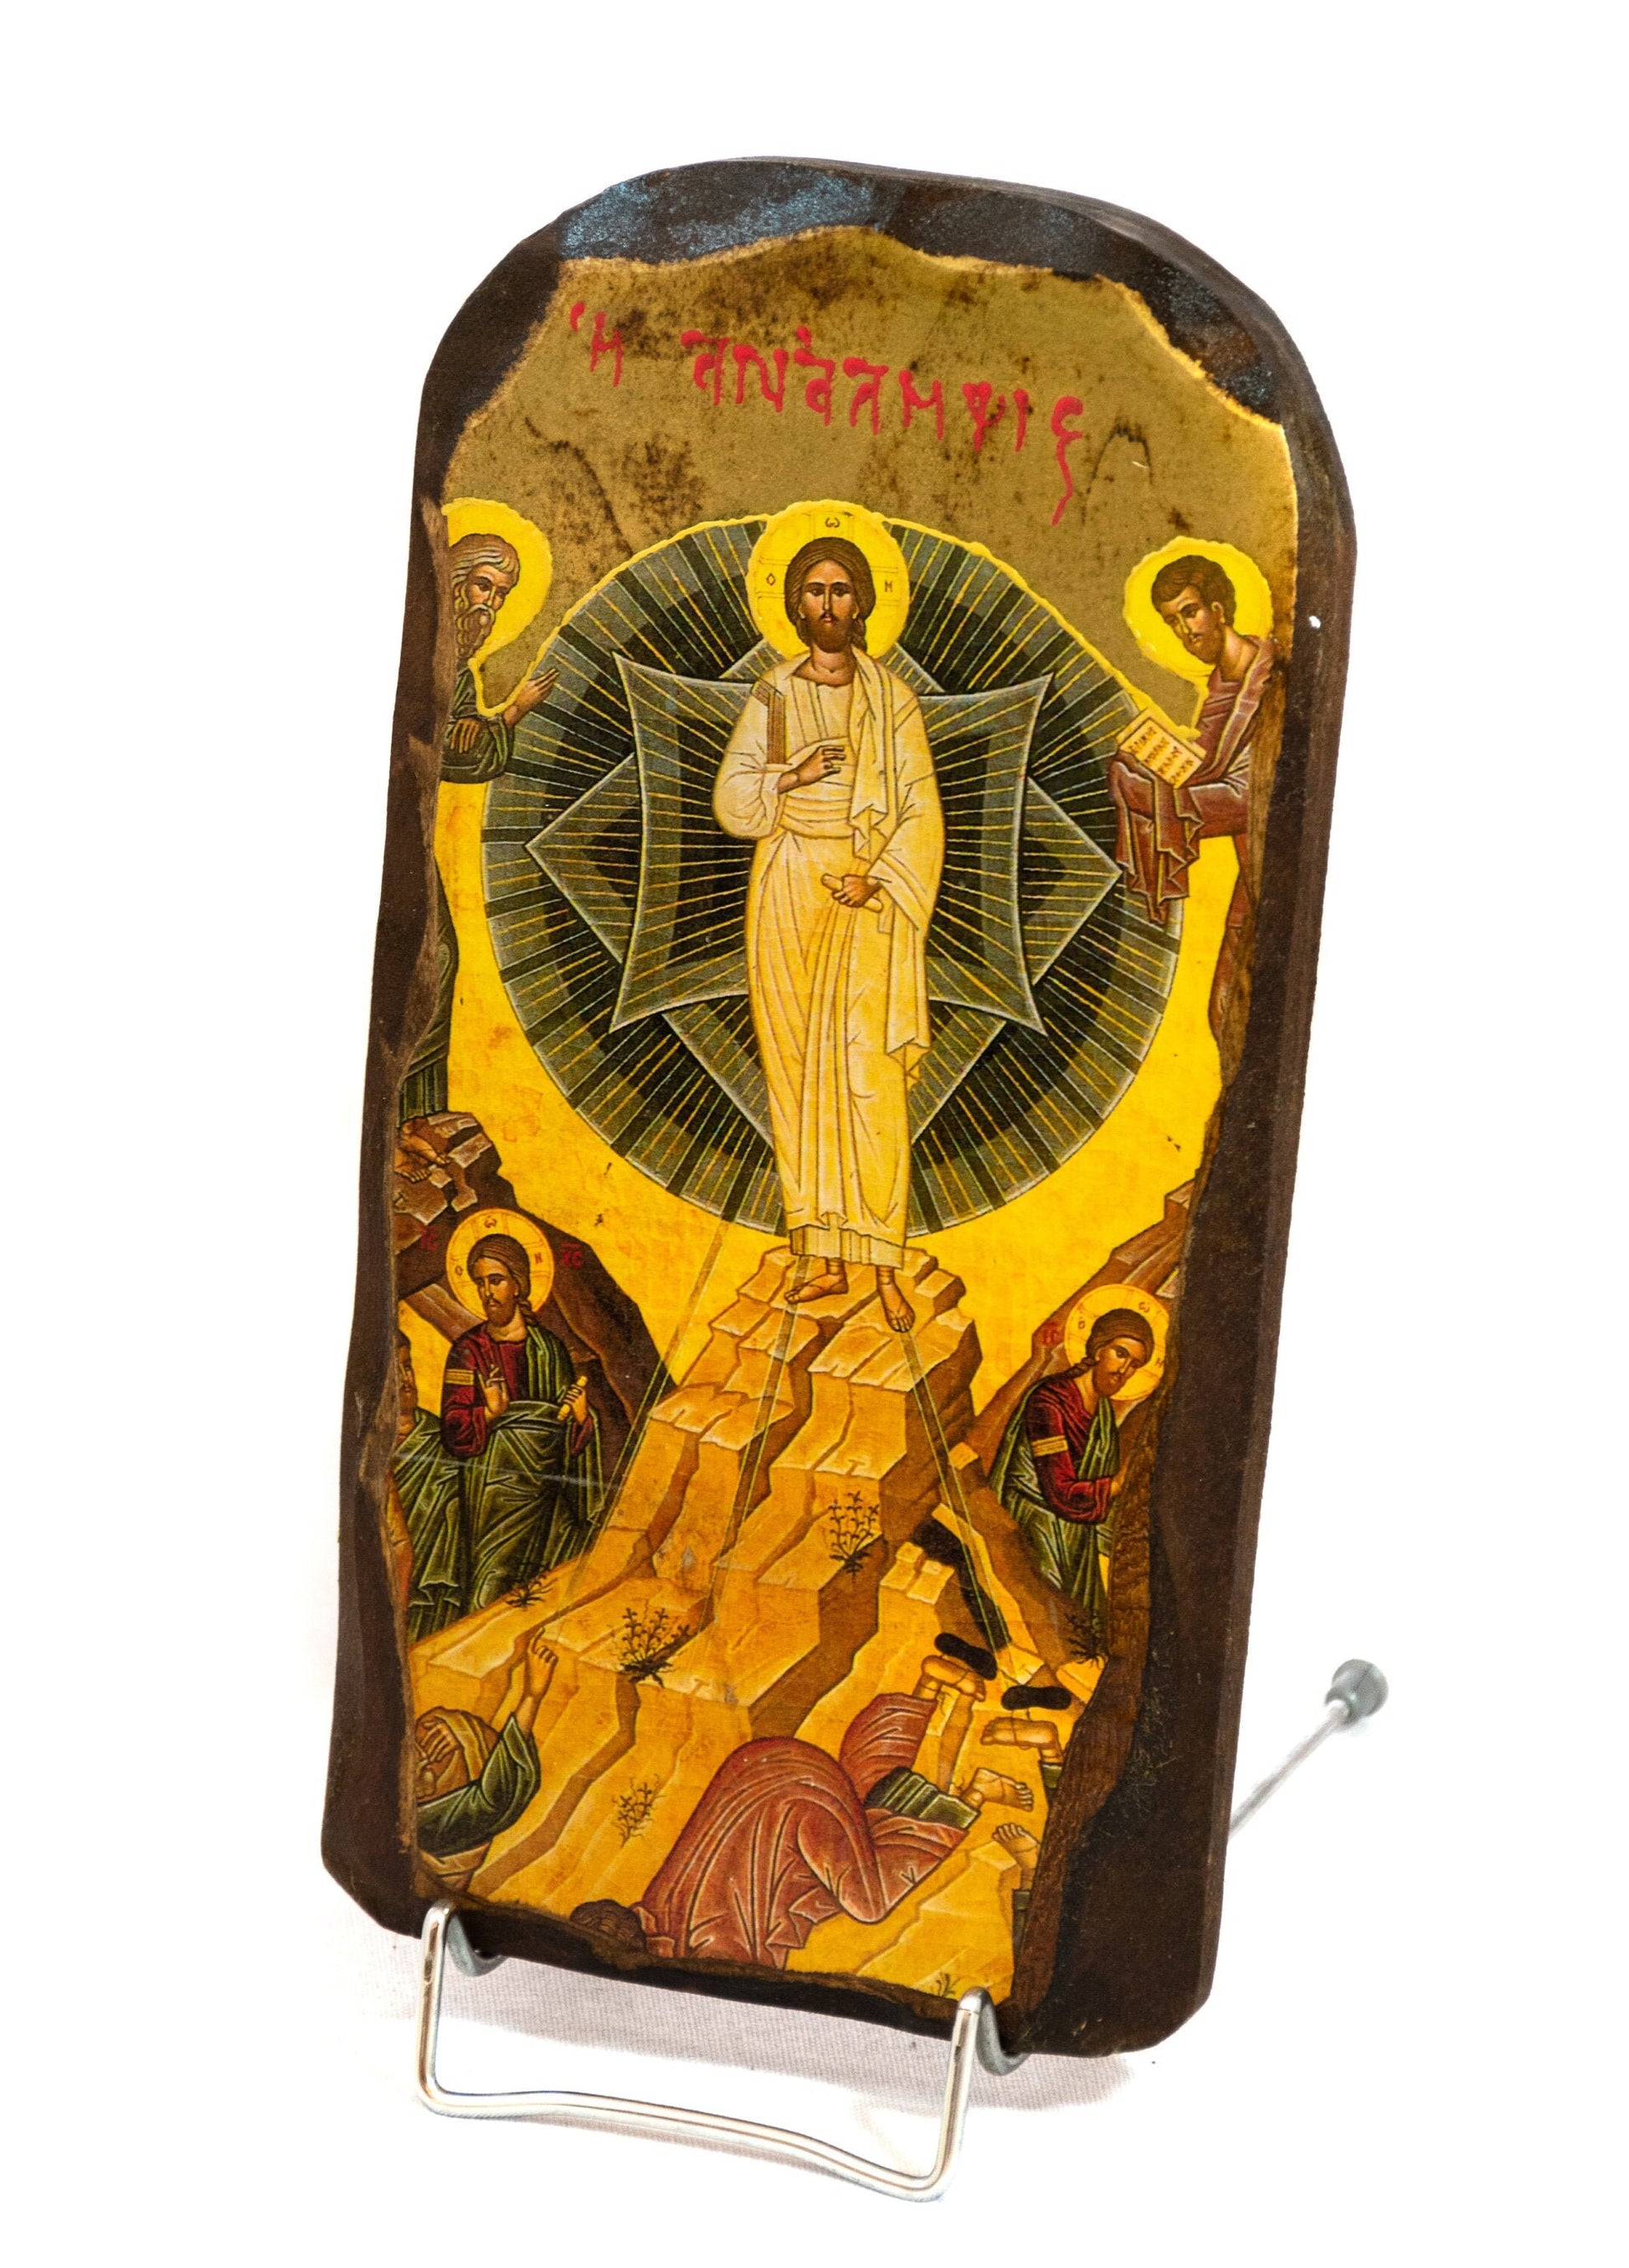 The Ascension of Jesus Christ icon, Handmade Greek Orthodox icon of Analipsi, Byzantine art wall hanging of our Lord rising to heaven plaque TheHolyArt